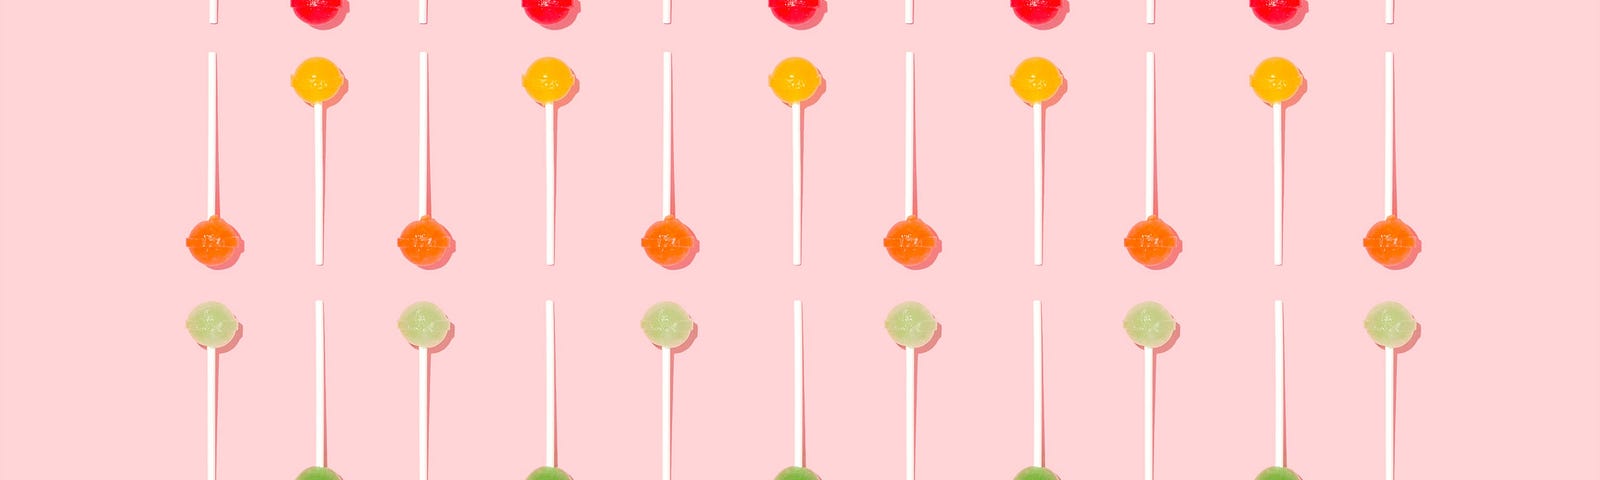 candy suckers lined up in rows, sorted by color